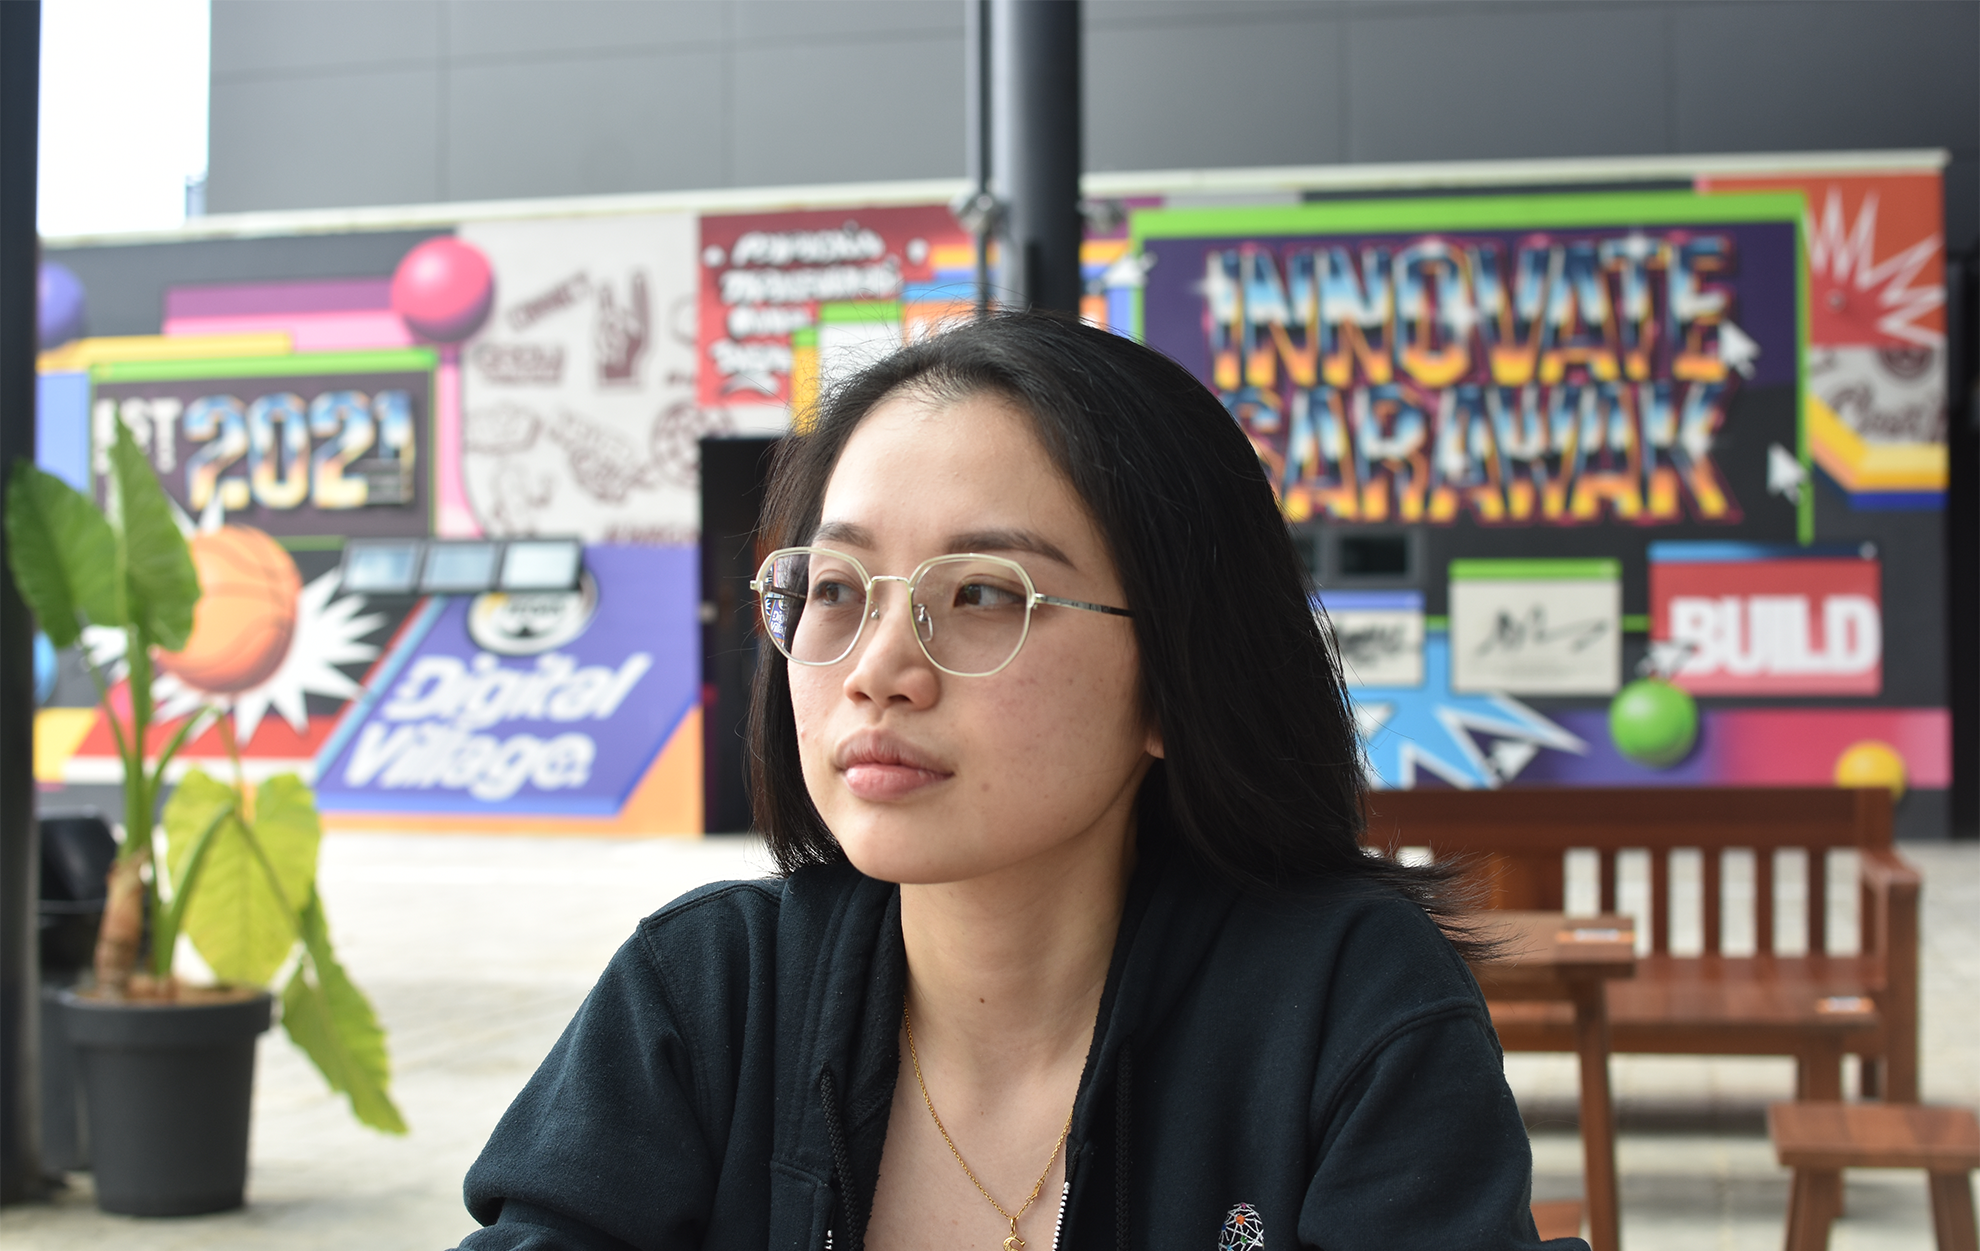 Bachelor of Multimedia Design alum Suan Goh, is blessed with an innate creative prowess that blossomed at an early age, setting her on a path of artistic exploration.